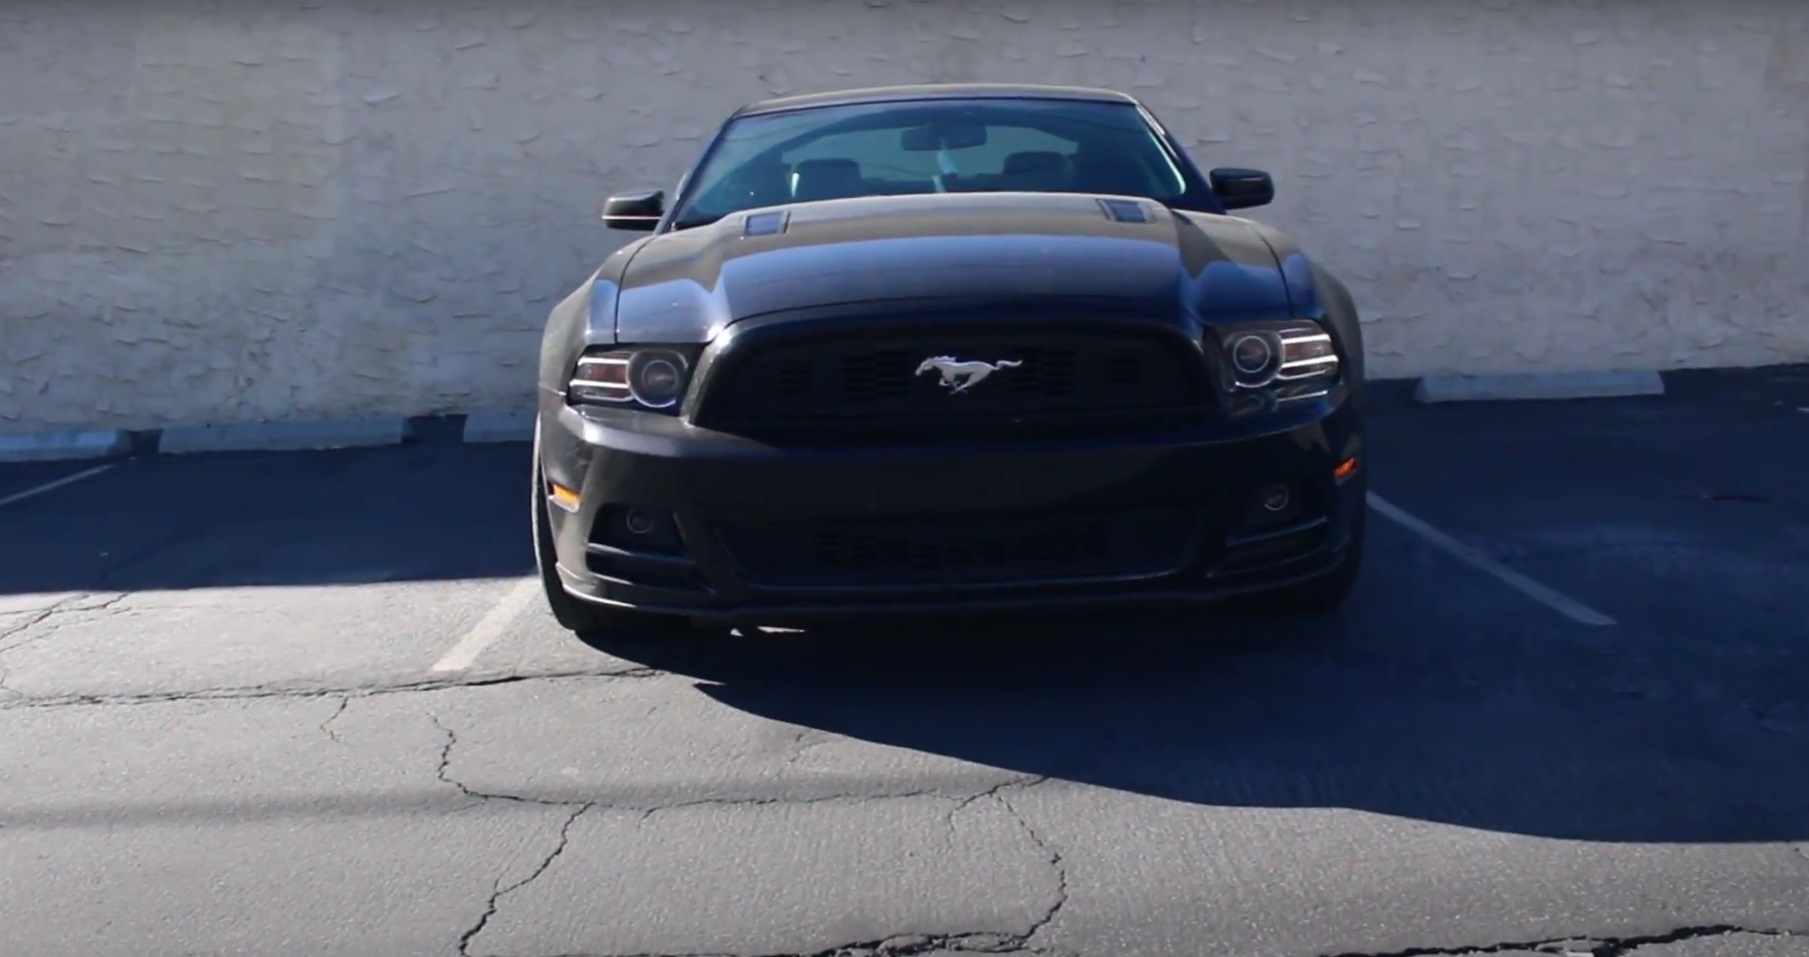 Video: 2014 Ford Mustang V6 Review 40,000 Miles Later